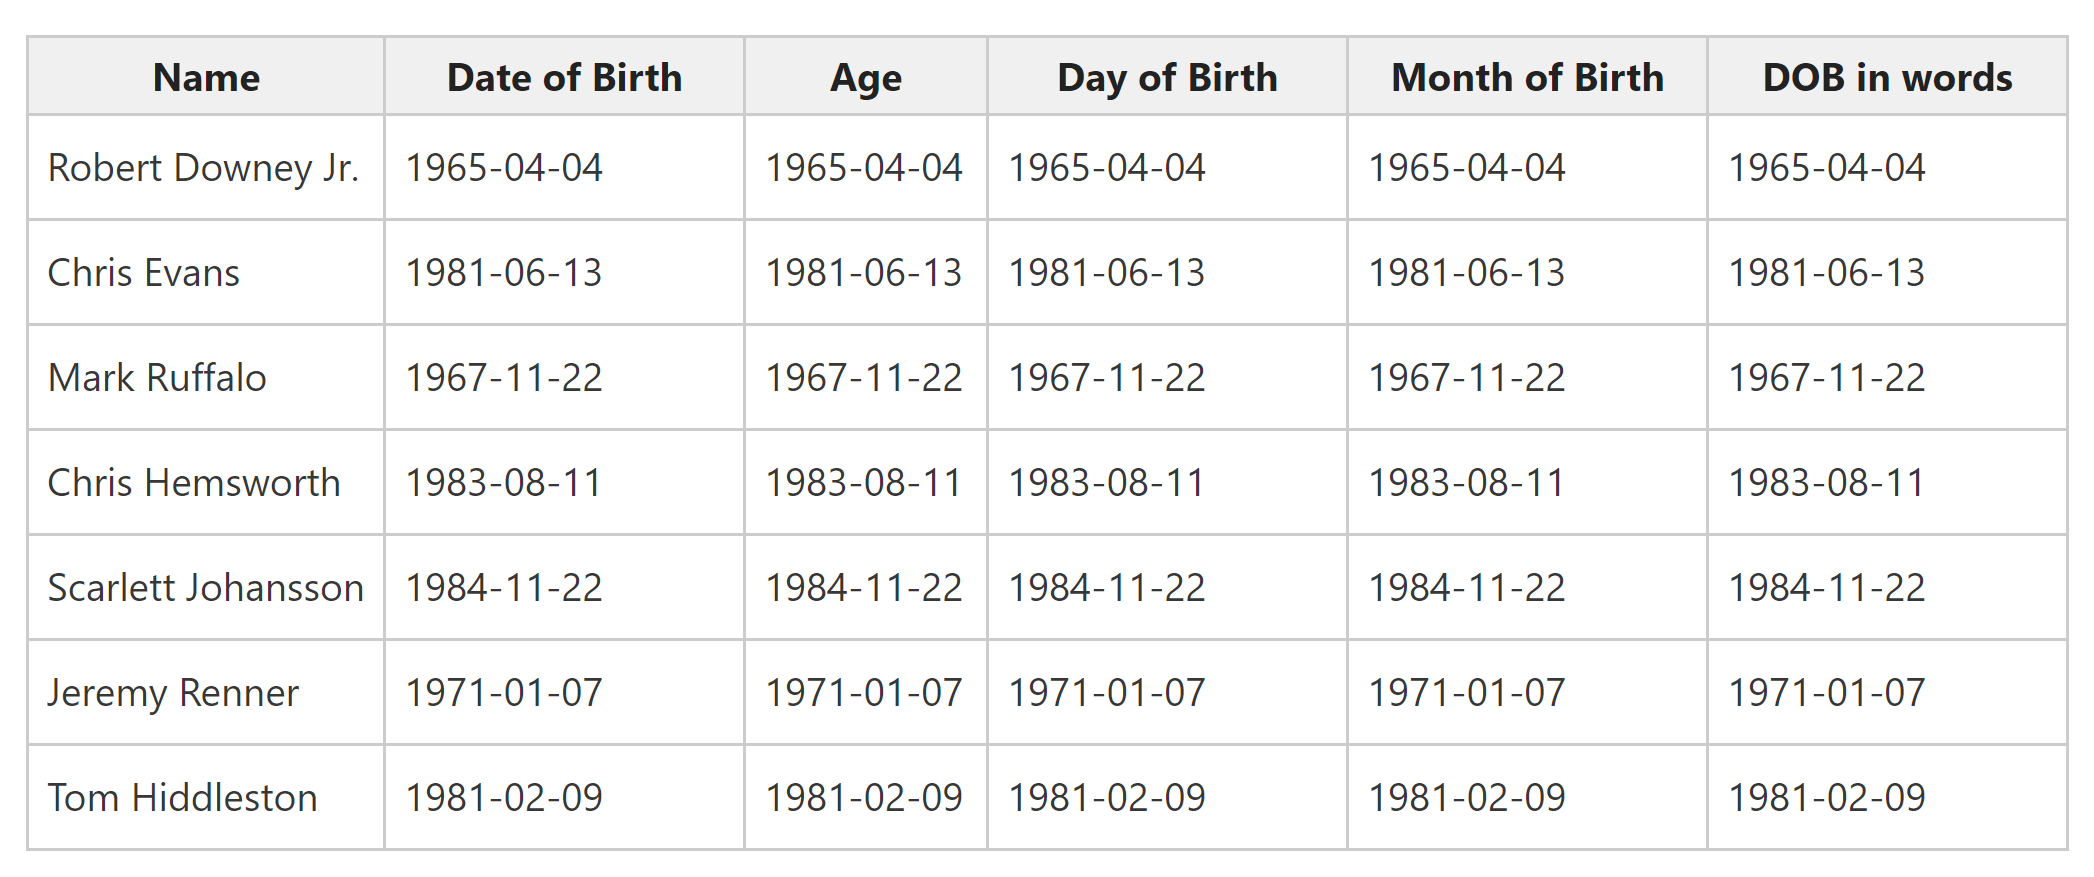 Handsontable data grid with dates - Hands-on: Format Date with date-fns and day.js in a data grid